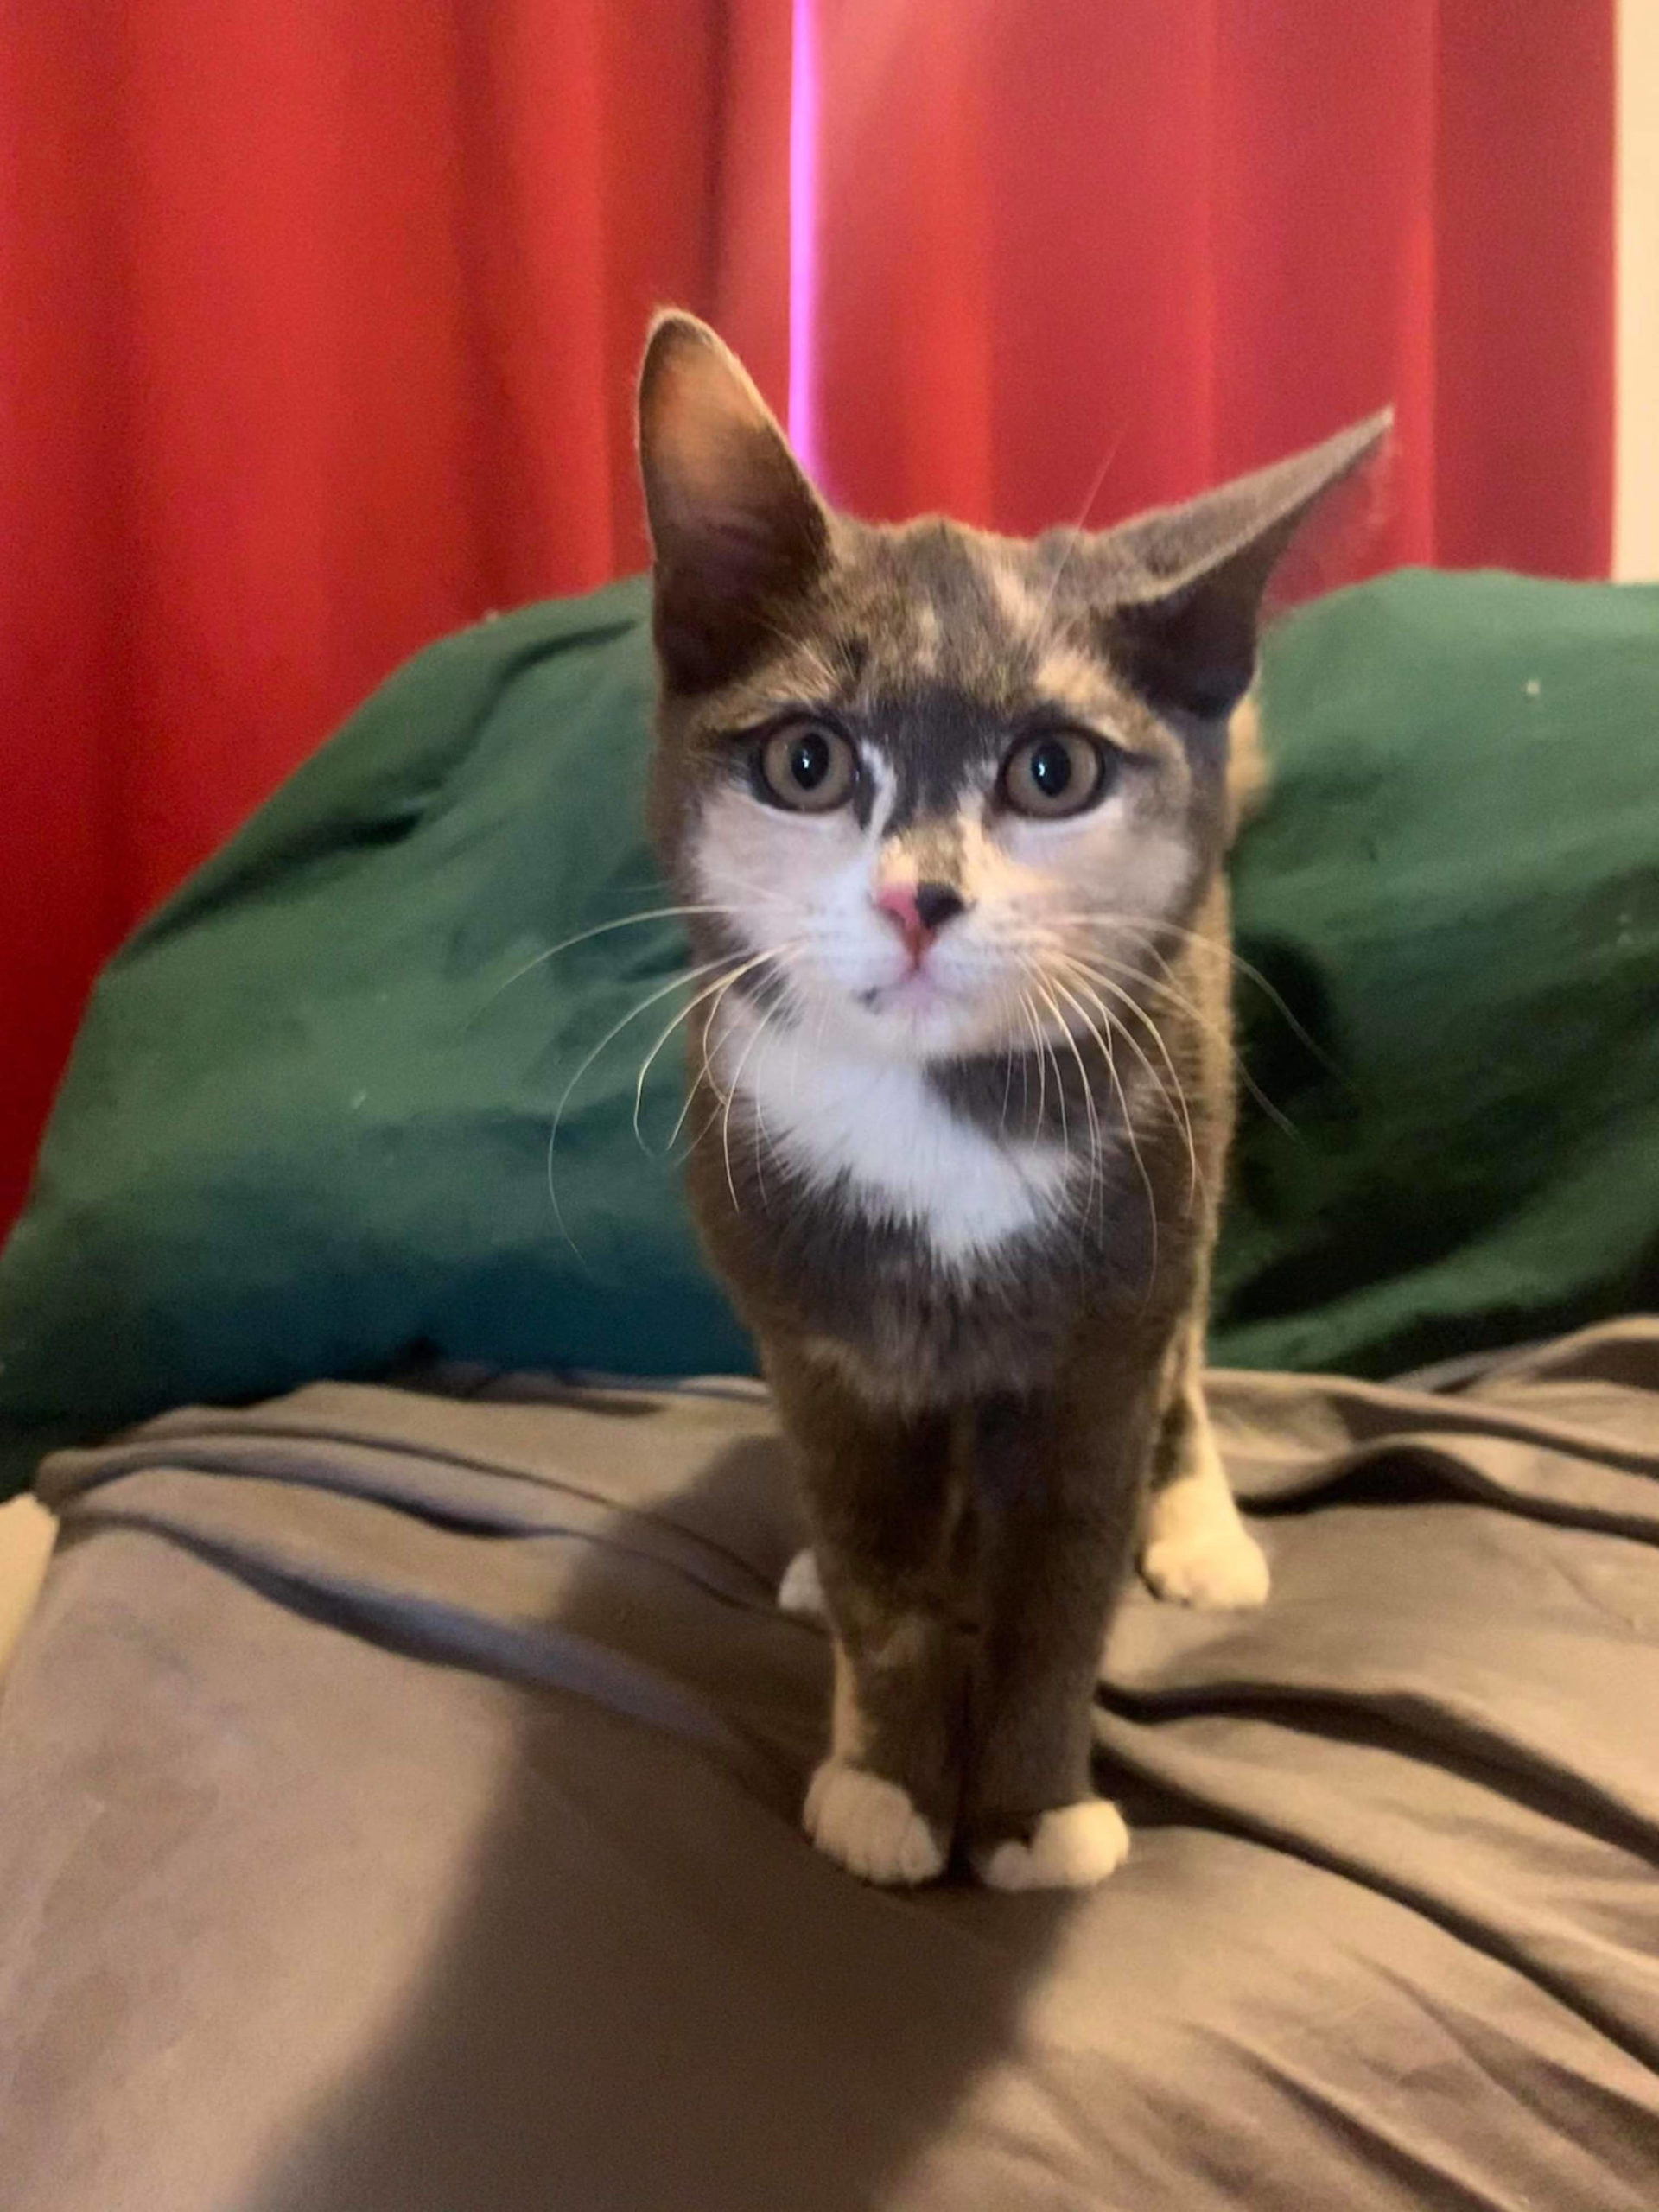 Spot, a kitten who escaped on an Alaska Marine Highway ferry bound from Washington to Haines, took a solo adventure in Juneau but was returned to her family in Haines by a thoughtful Juneau resident on March 9, 2021. (Courtesy photo / Ashlyn Harper)